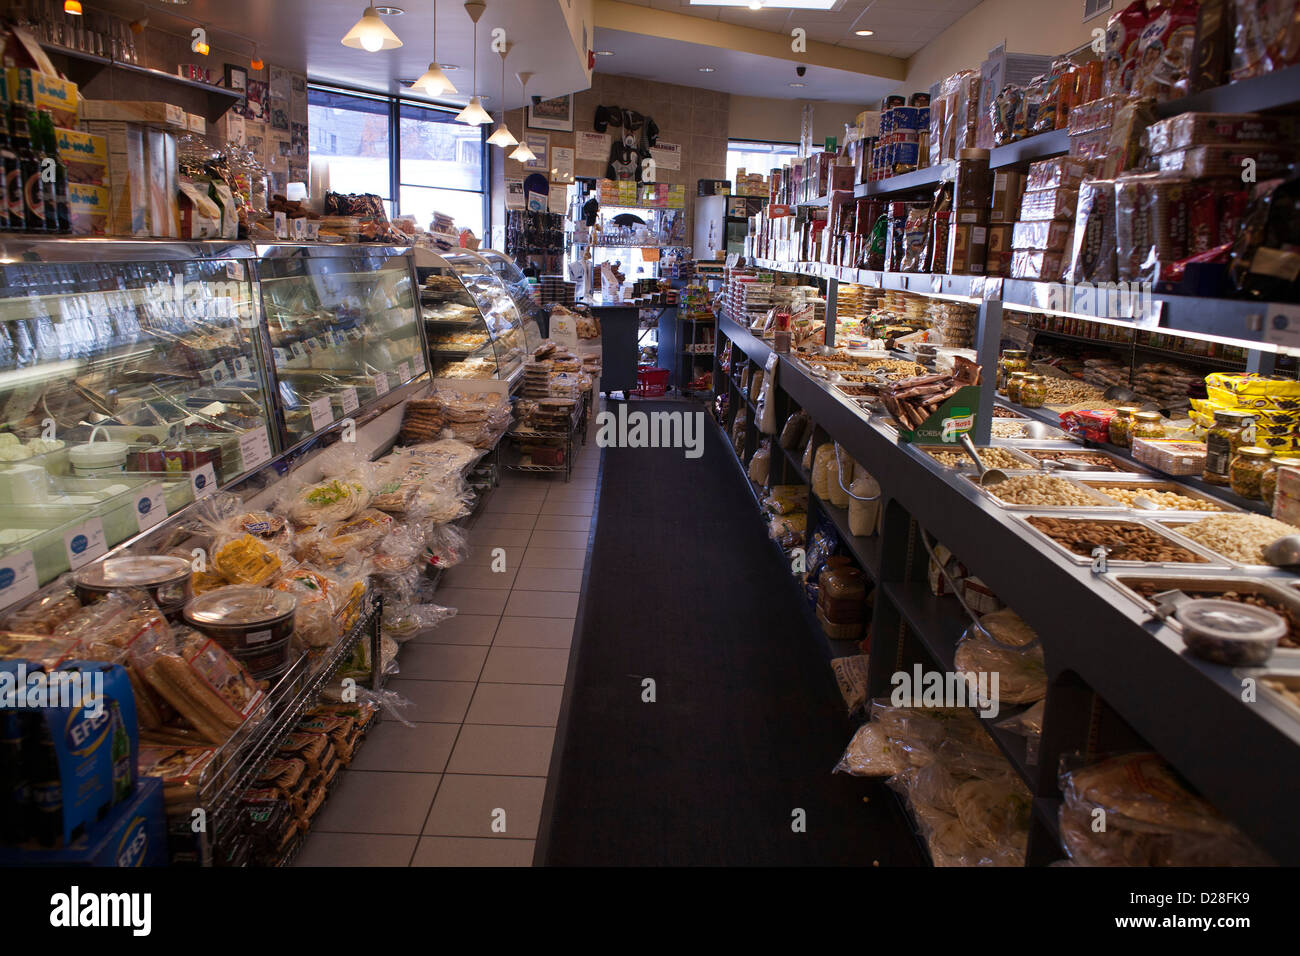 A Middle Eastern deli in Watertown, Massachusetts has a wide variety of products. Stock Photo